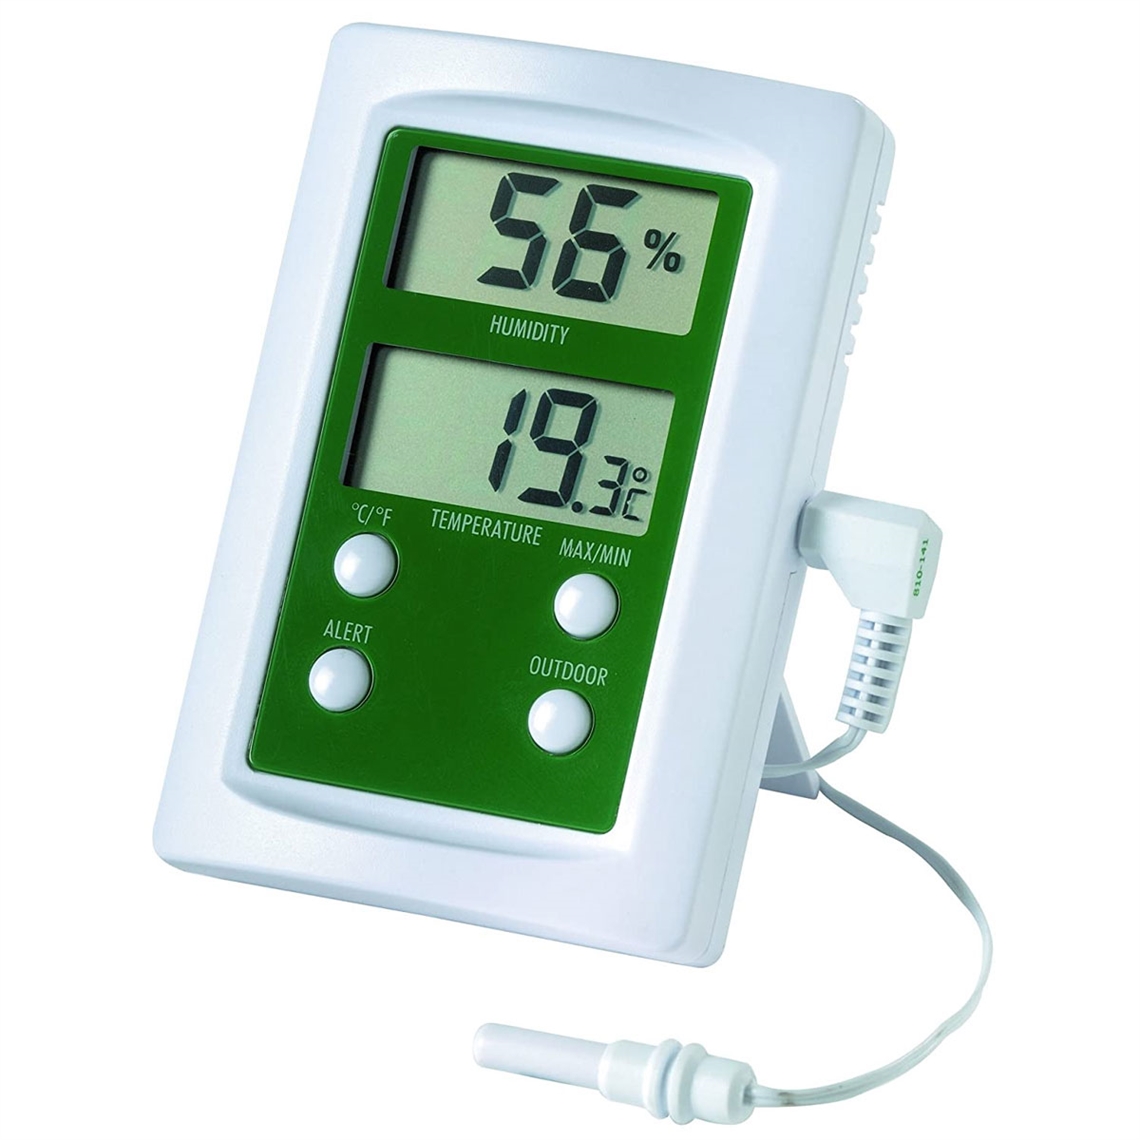 View more winesaver pro from our Thermo Hygrometers range